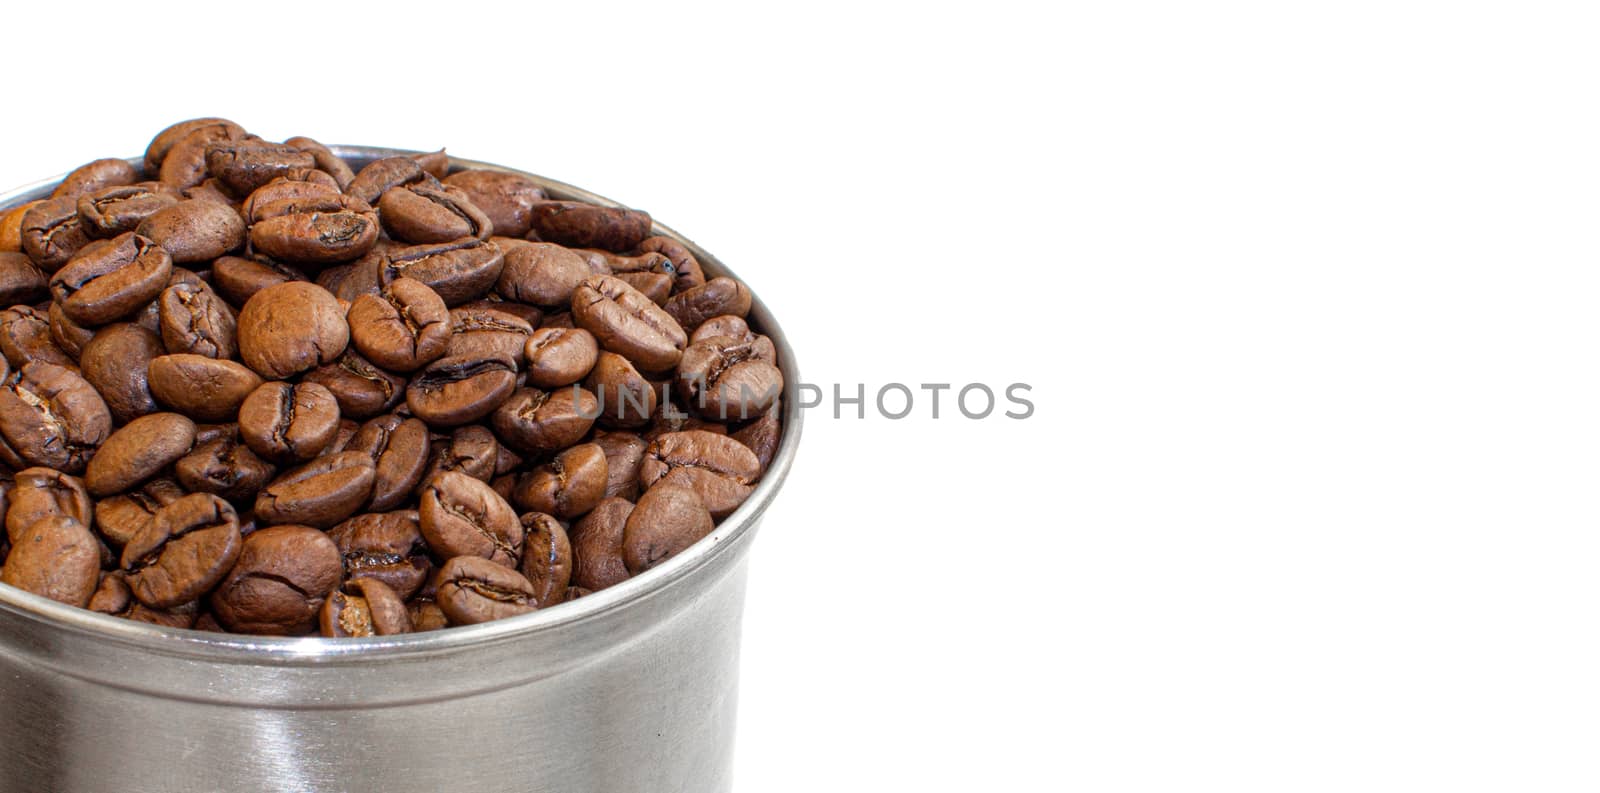 A lot of coffee beans in a metal coffee grinder on a white background. Isolated coffee items